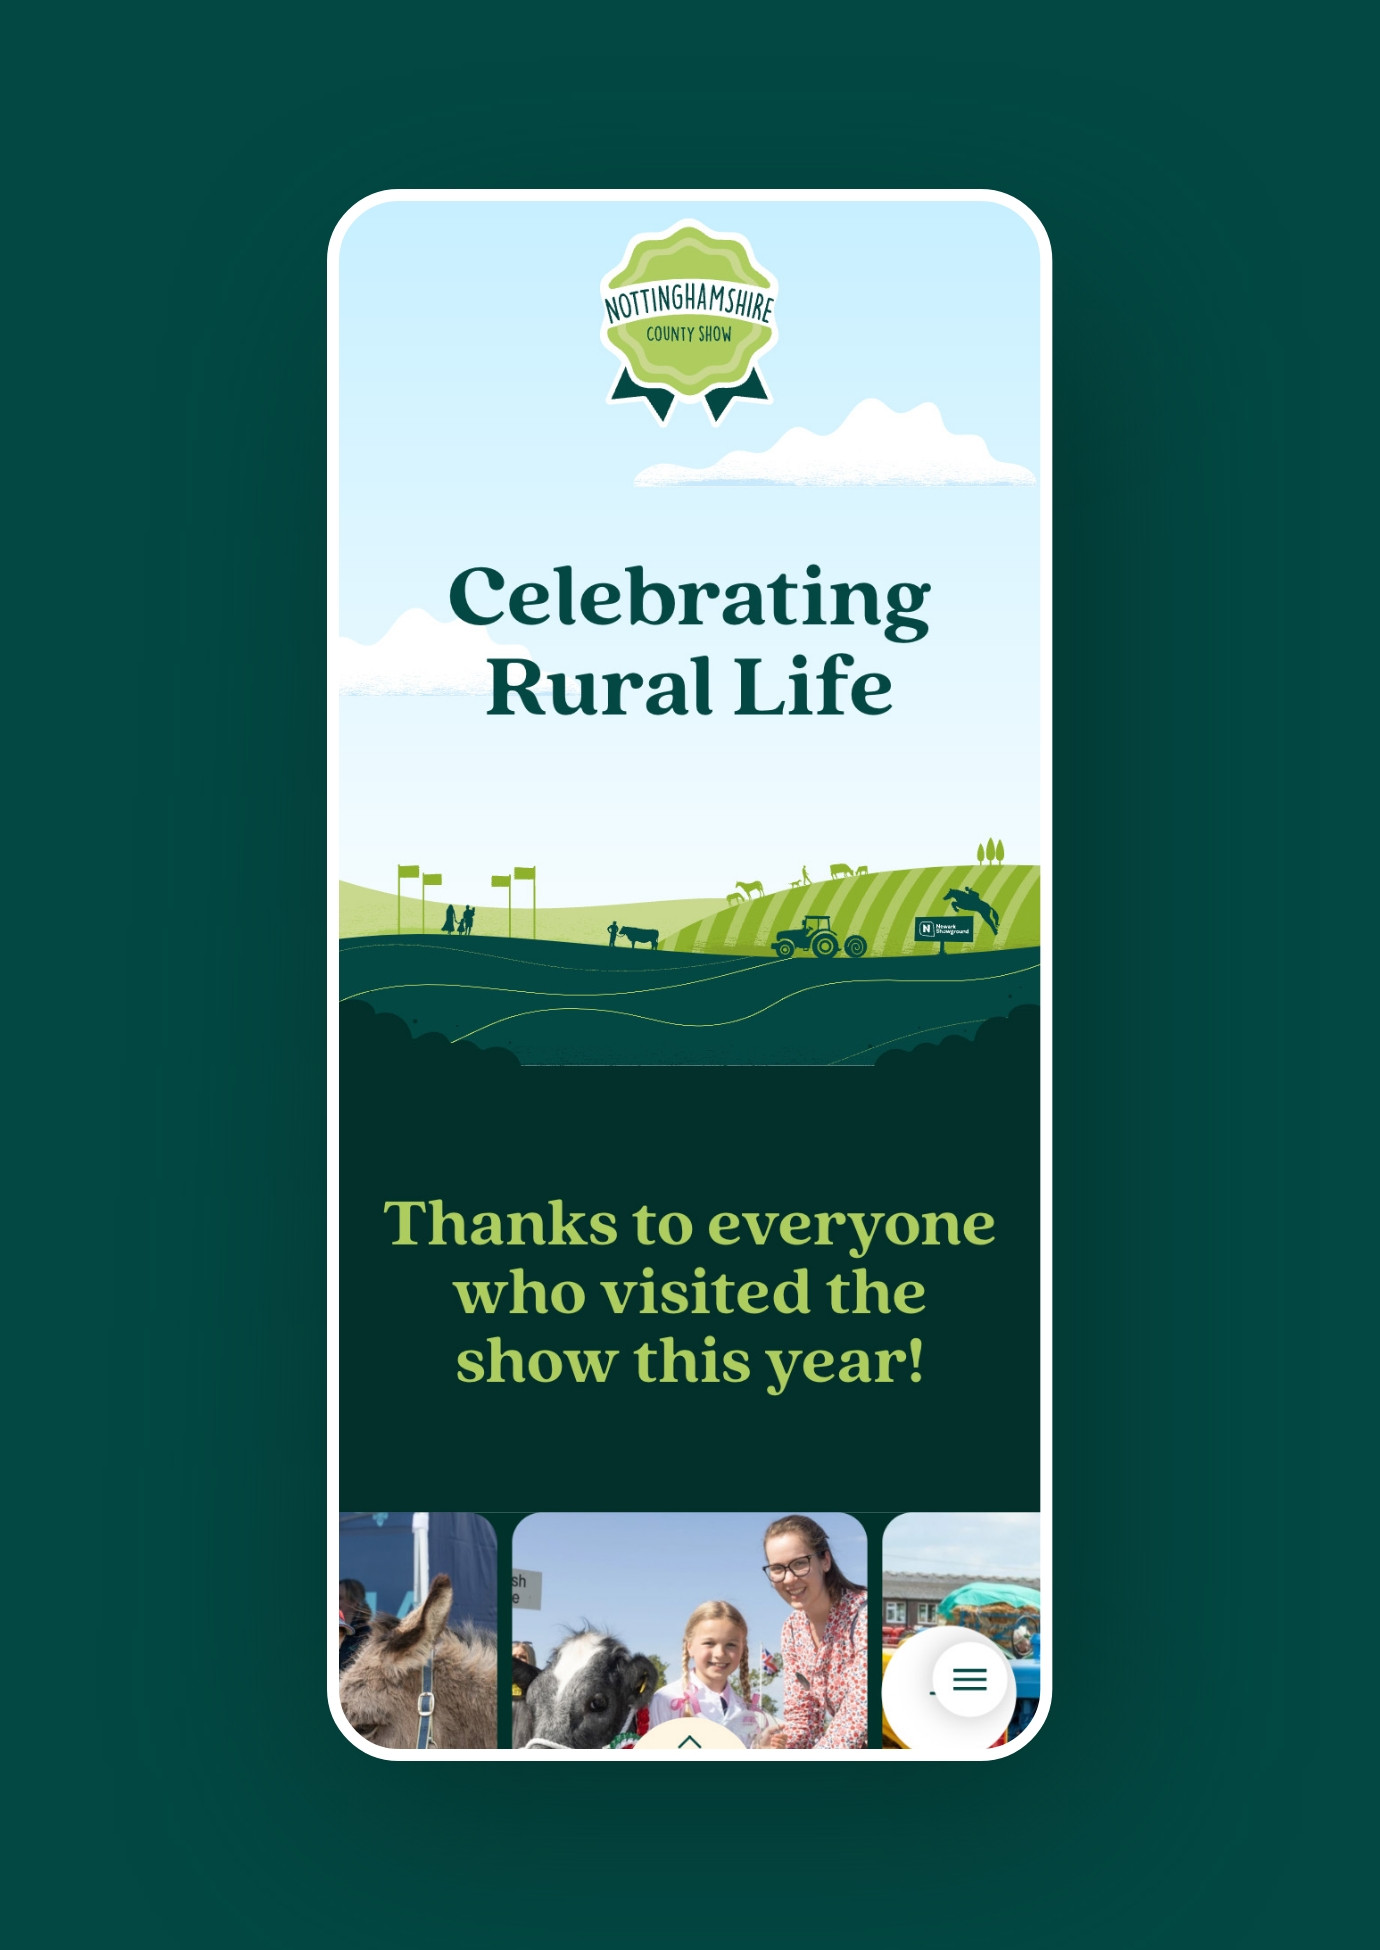 Nottinghamshire agricultural show website design by Root Studio